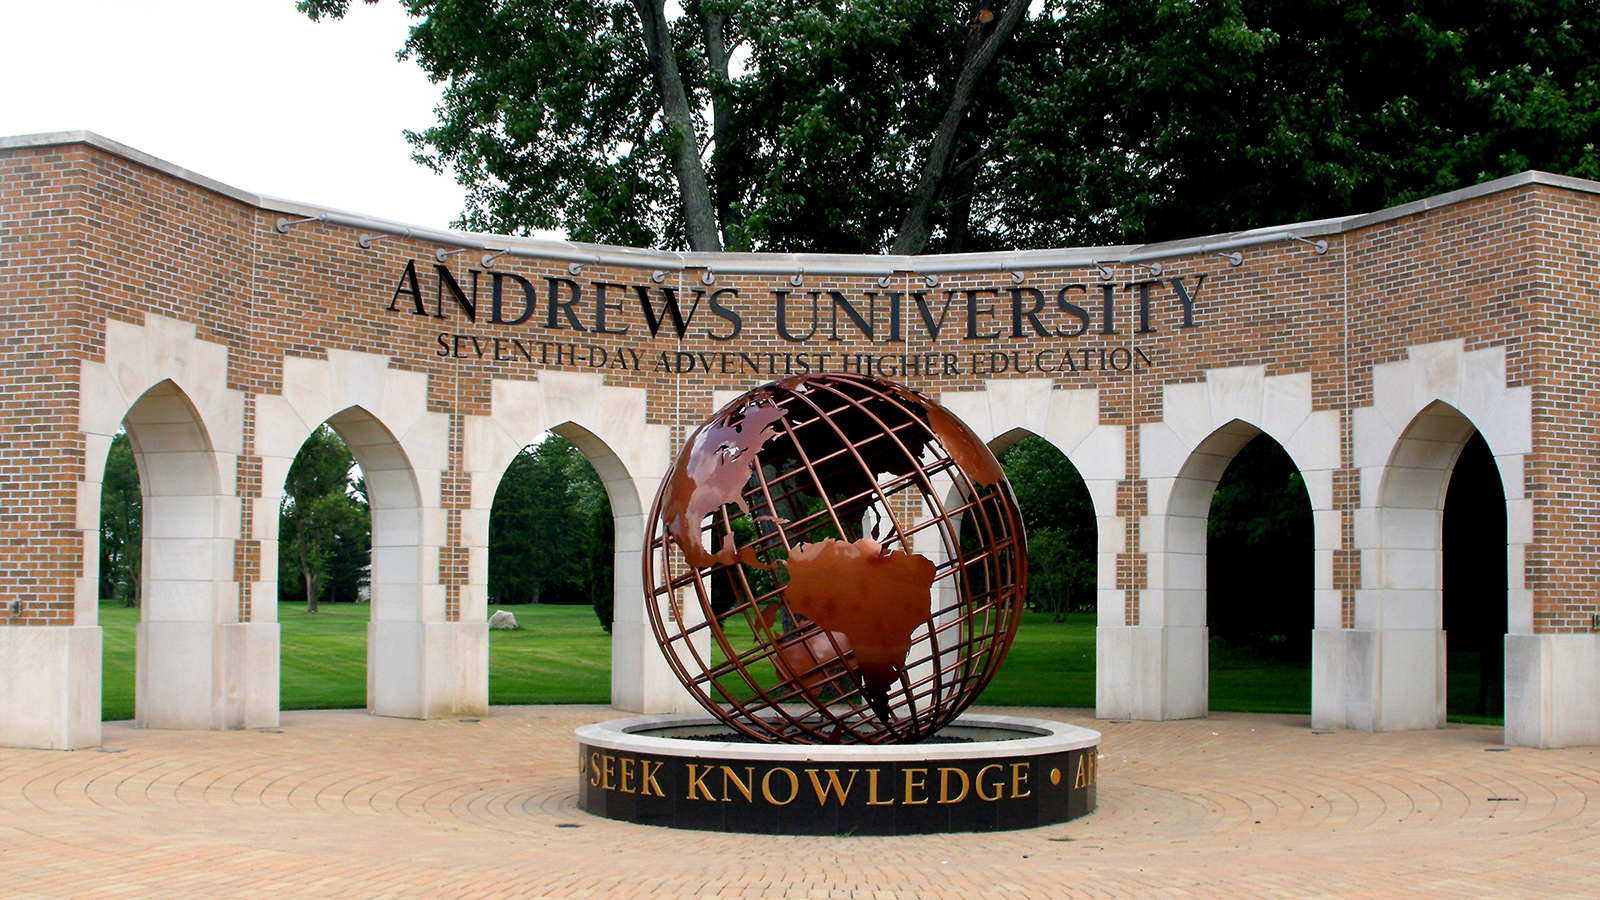 Andrews University, the flagship university of the Seventh Day Adventist Church, in Berrien Springs, Michigan. (Photo by FotoGuy 49057/Wikipedia/Creative Commons)